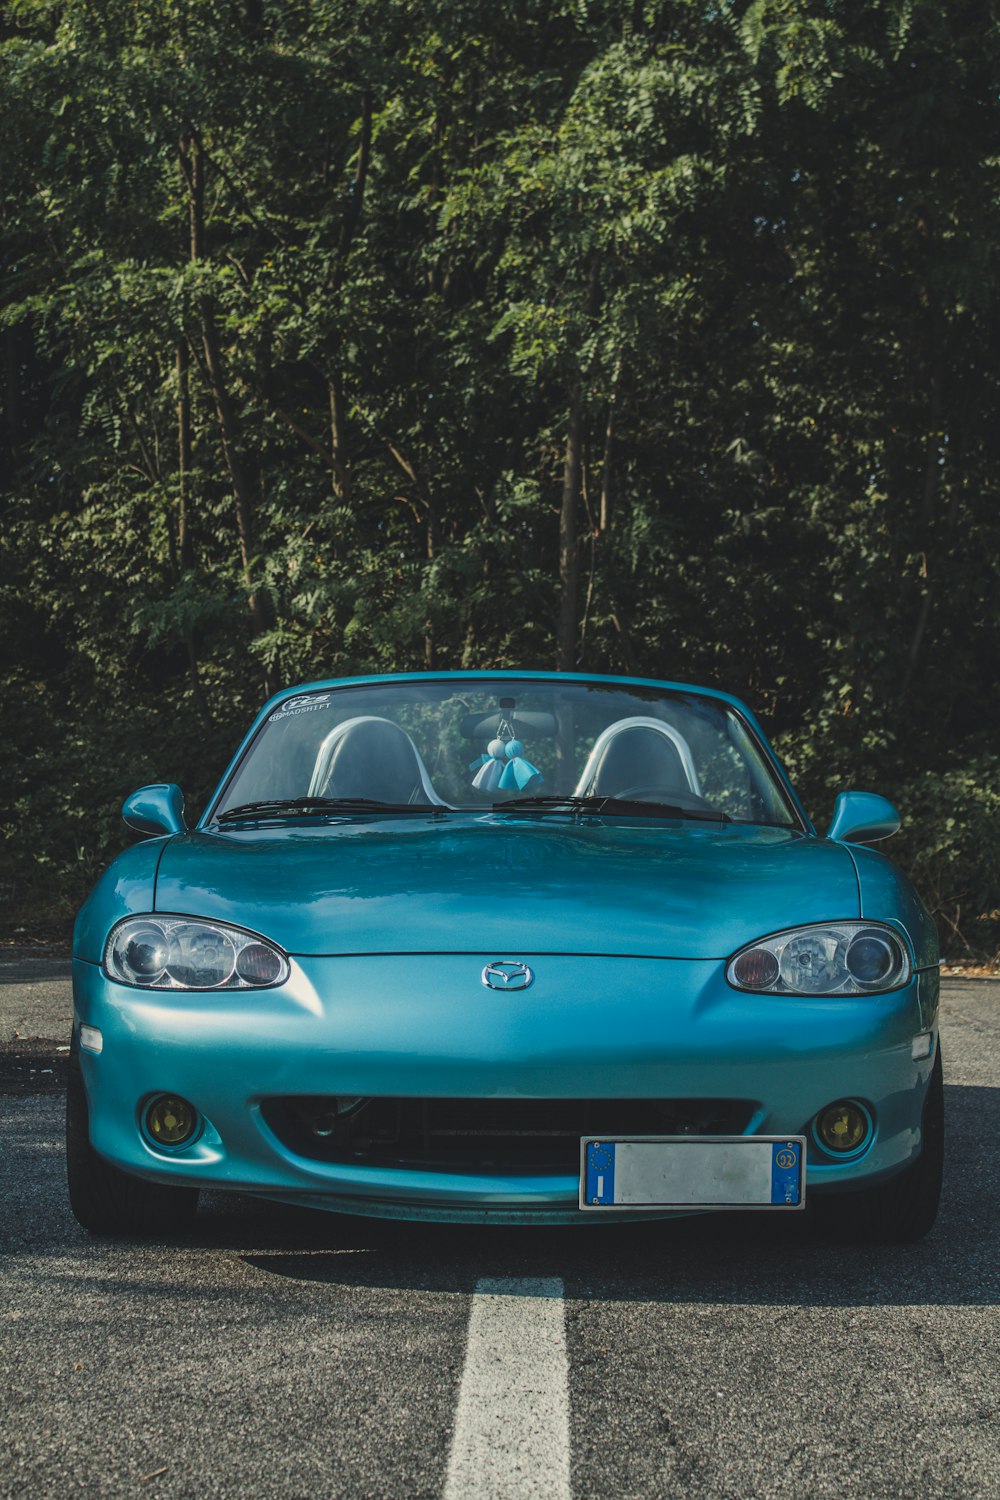 Blue Mazda Miata convertible coupe on road during day photo – Free Car  Image on Unsplash